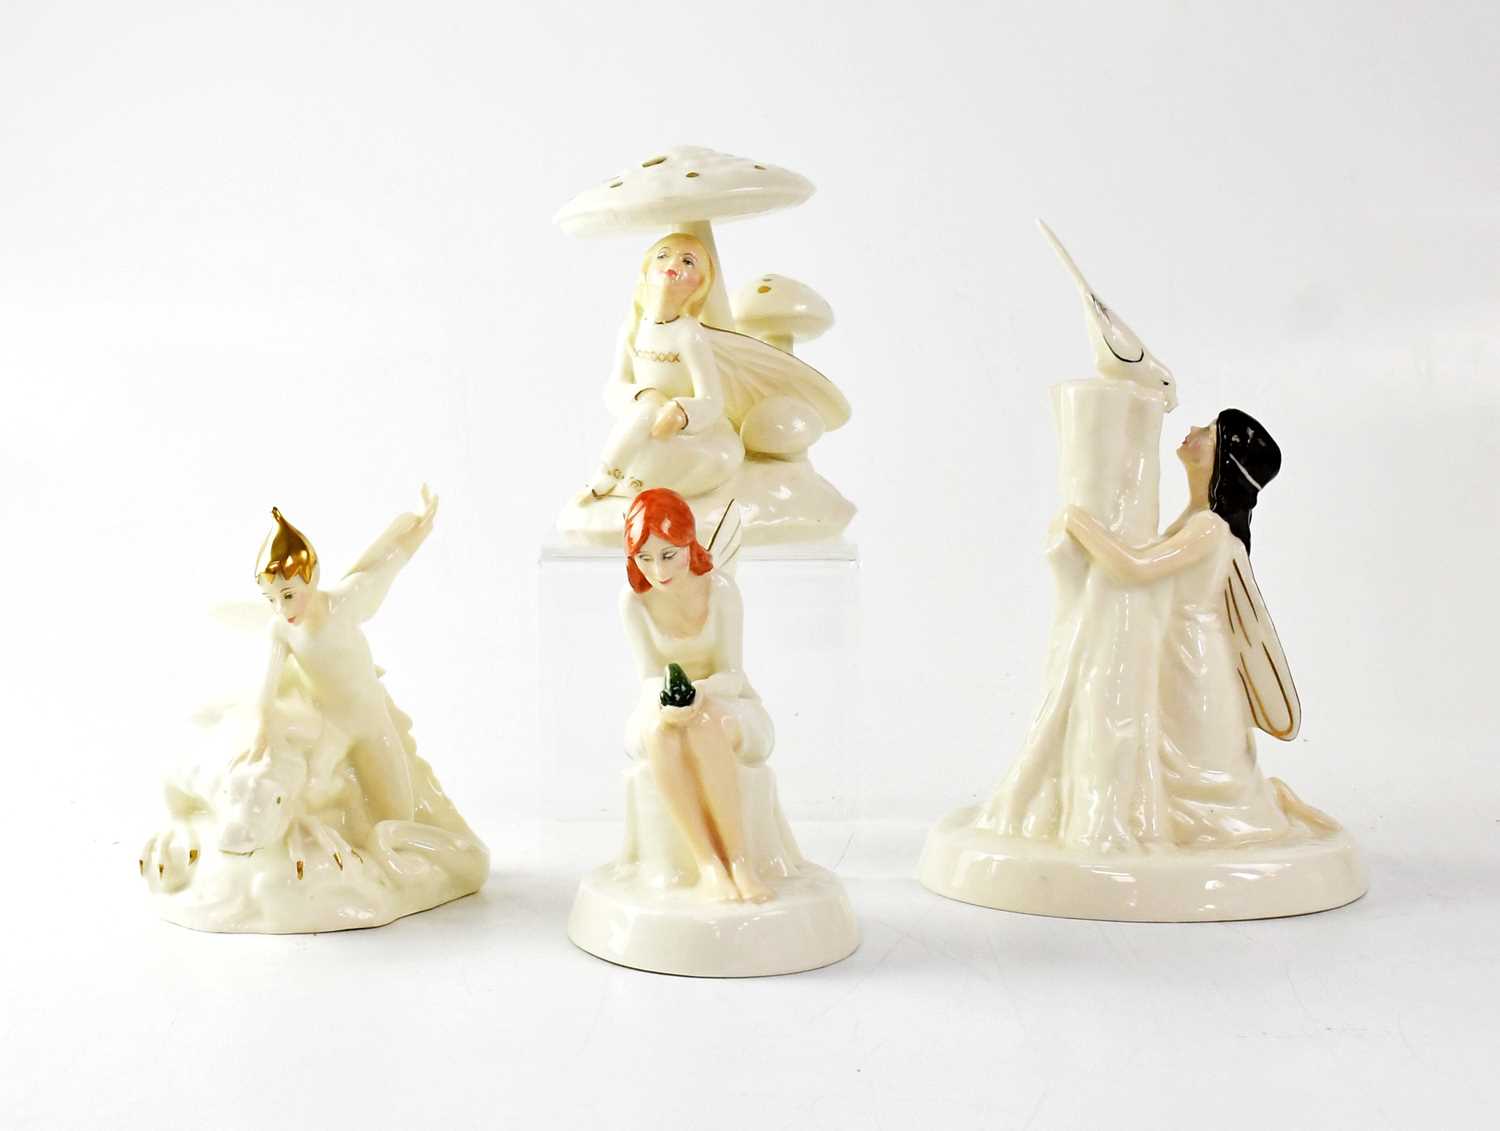 ROYAL DOULTON; four figures from the Enchantment collection comprising HN3024 'April Shower', HN2979